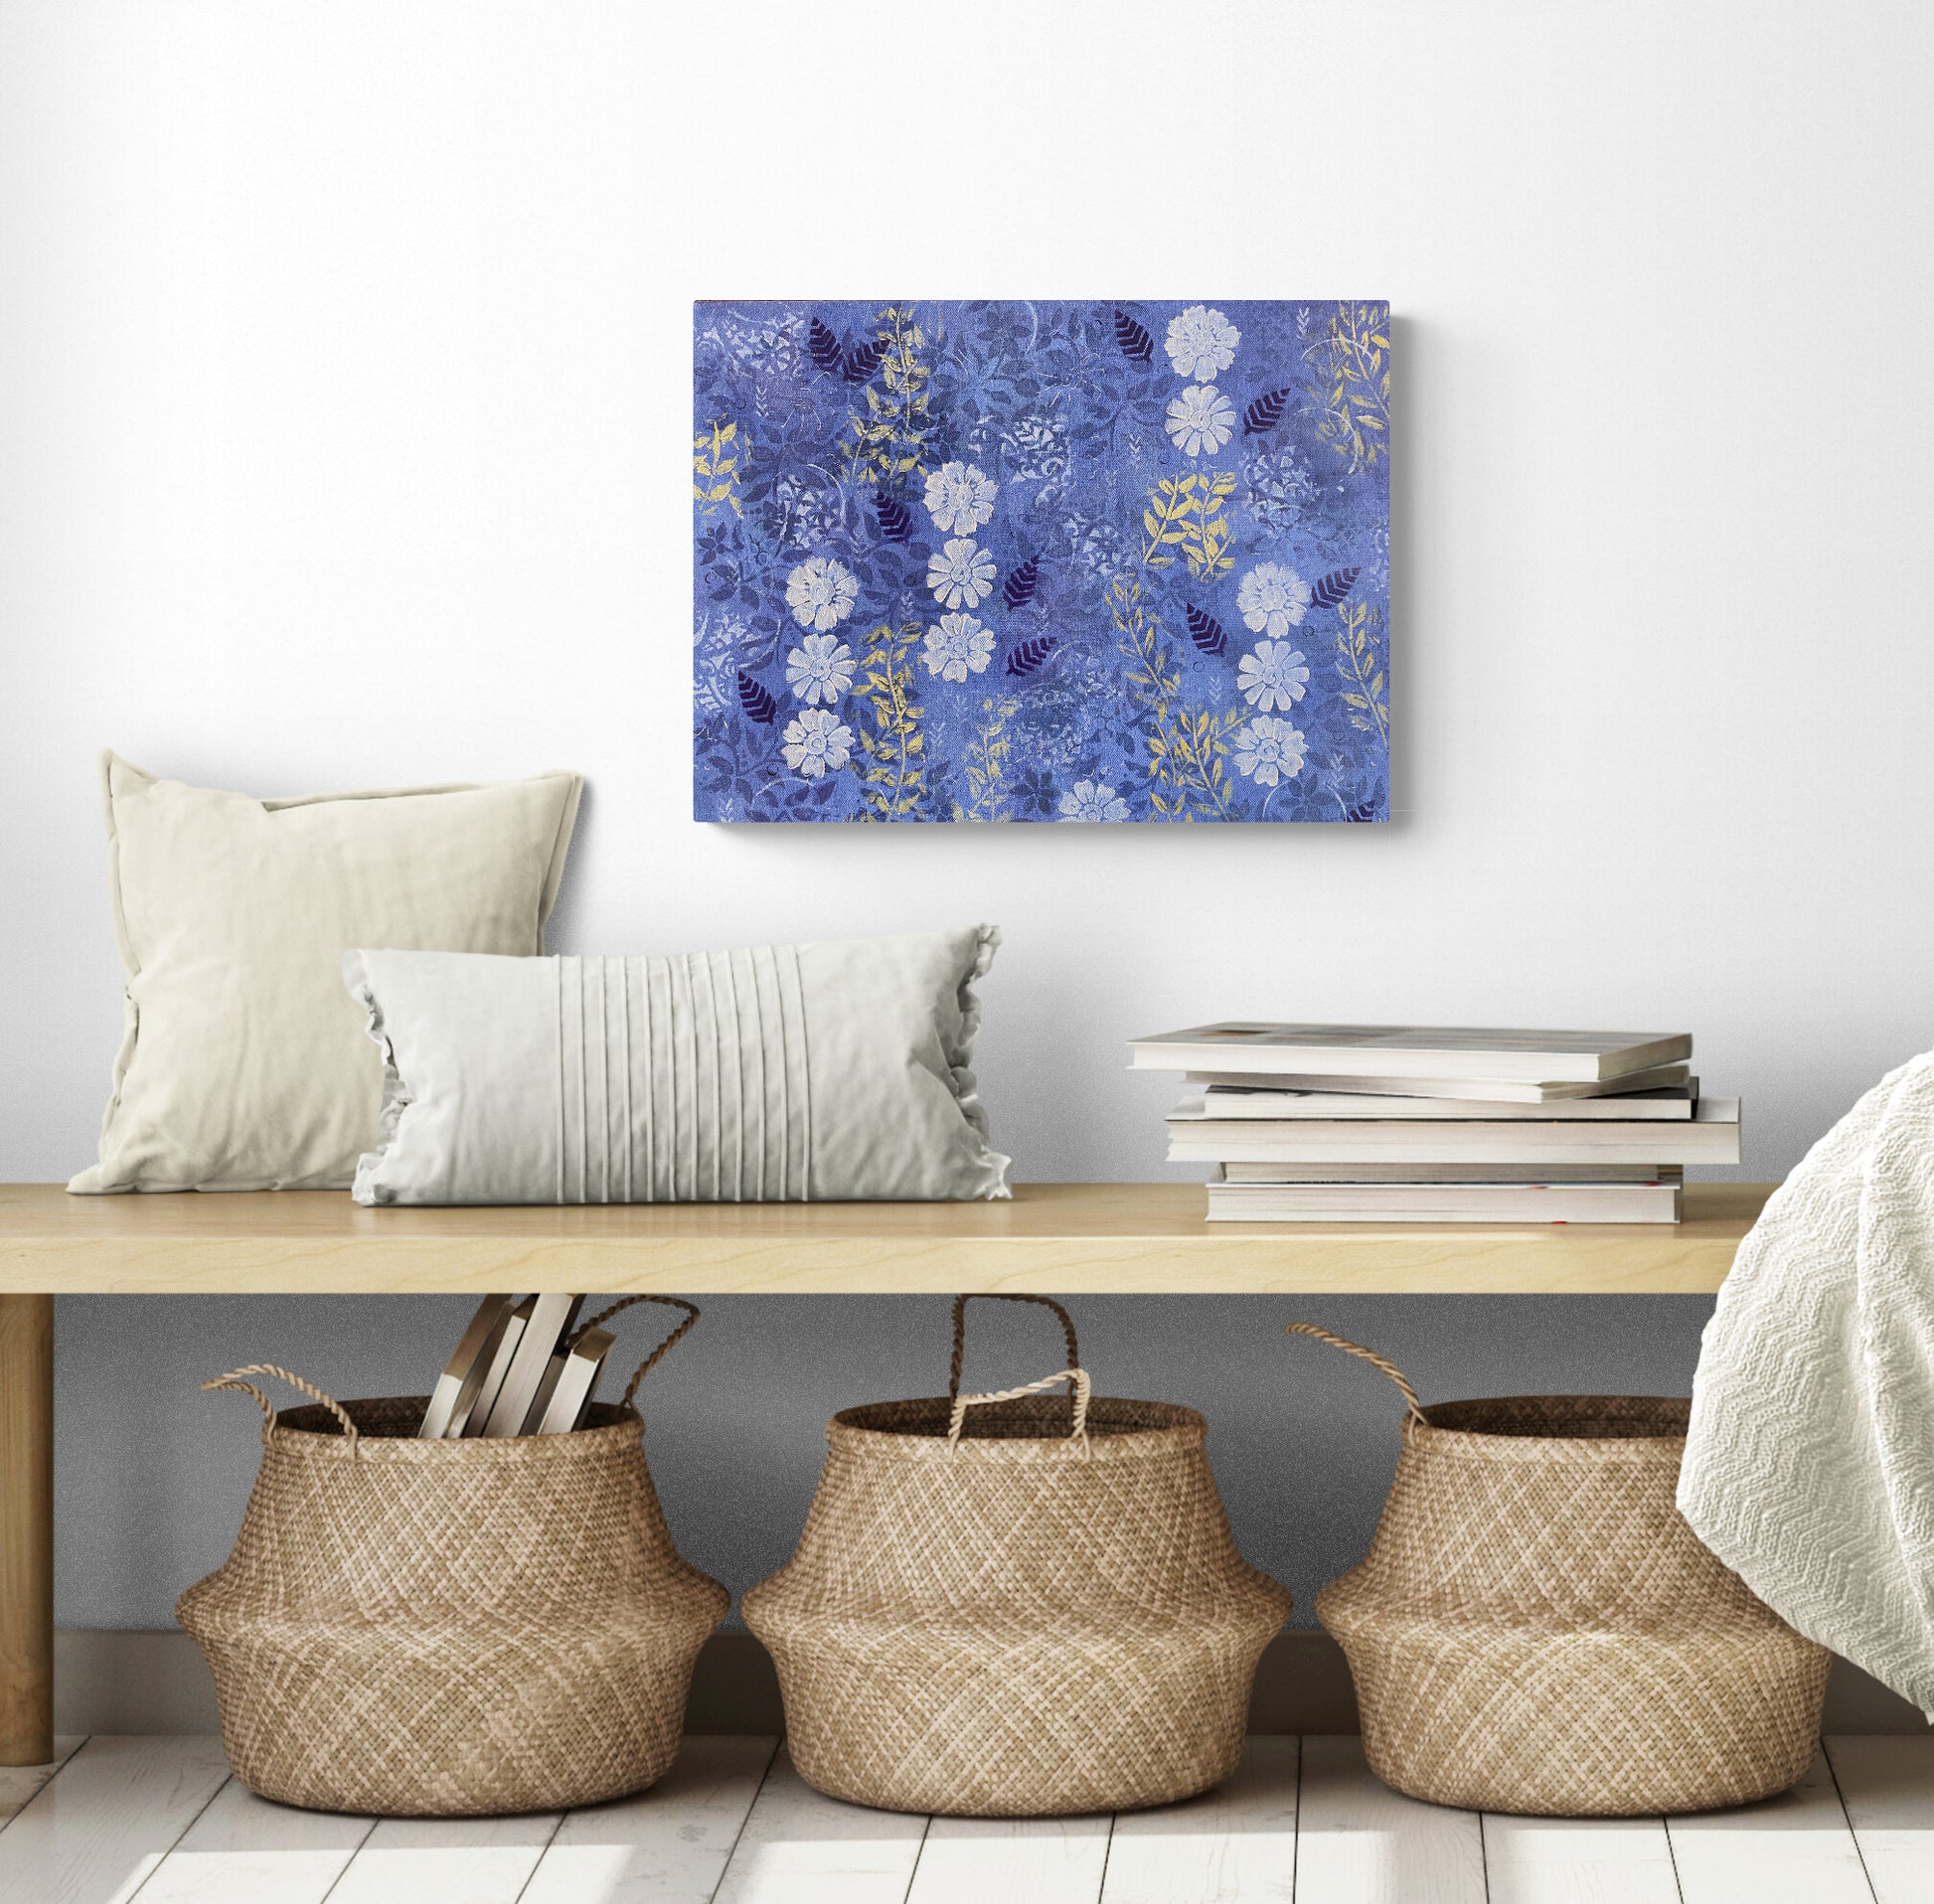 original abstract acrylic painting periwinkle background white flowers yellow-green and navy leaves cool calm feeling in room with bench and baskets